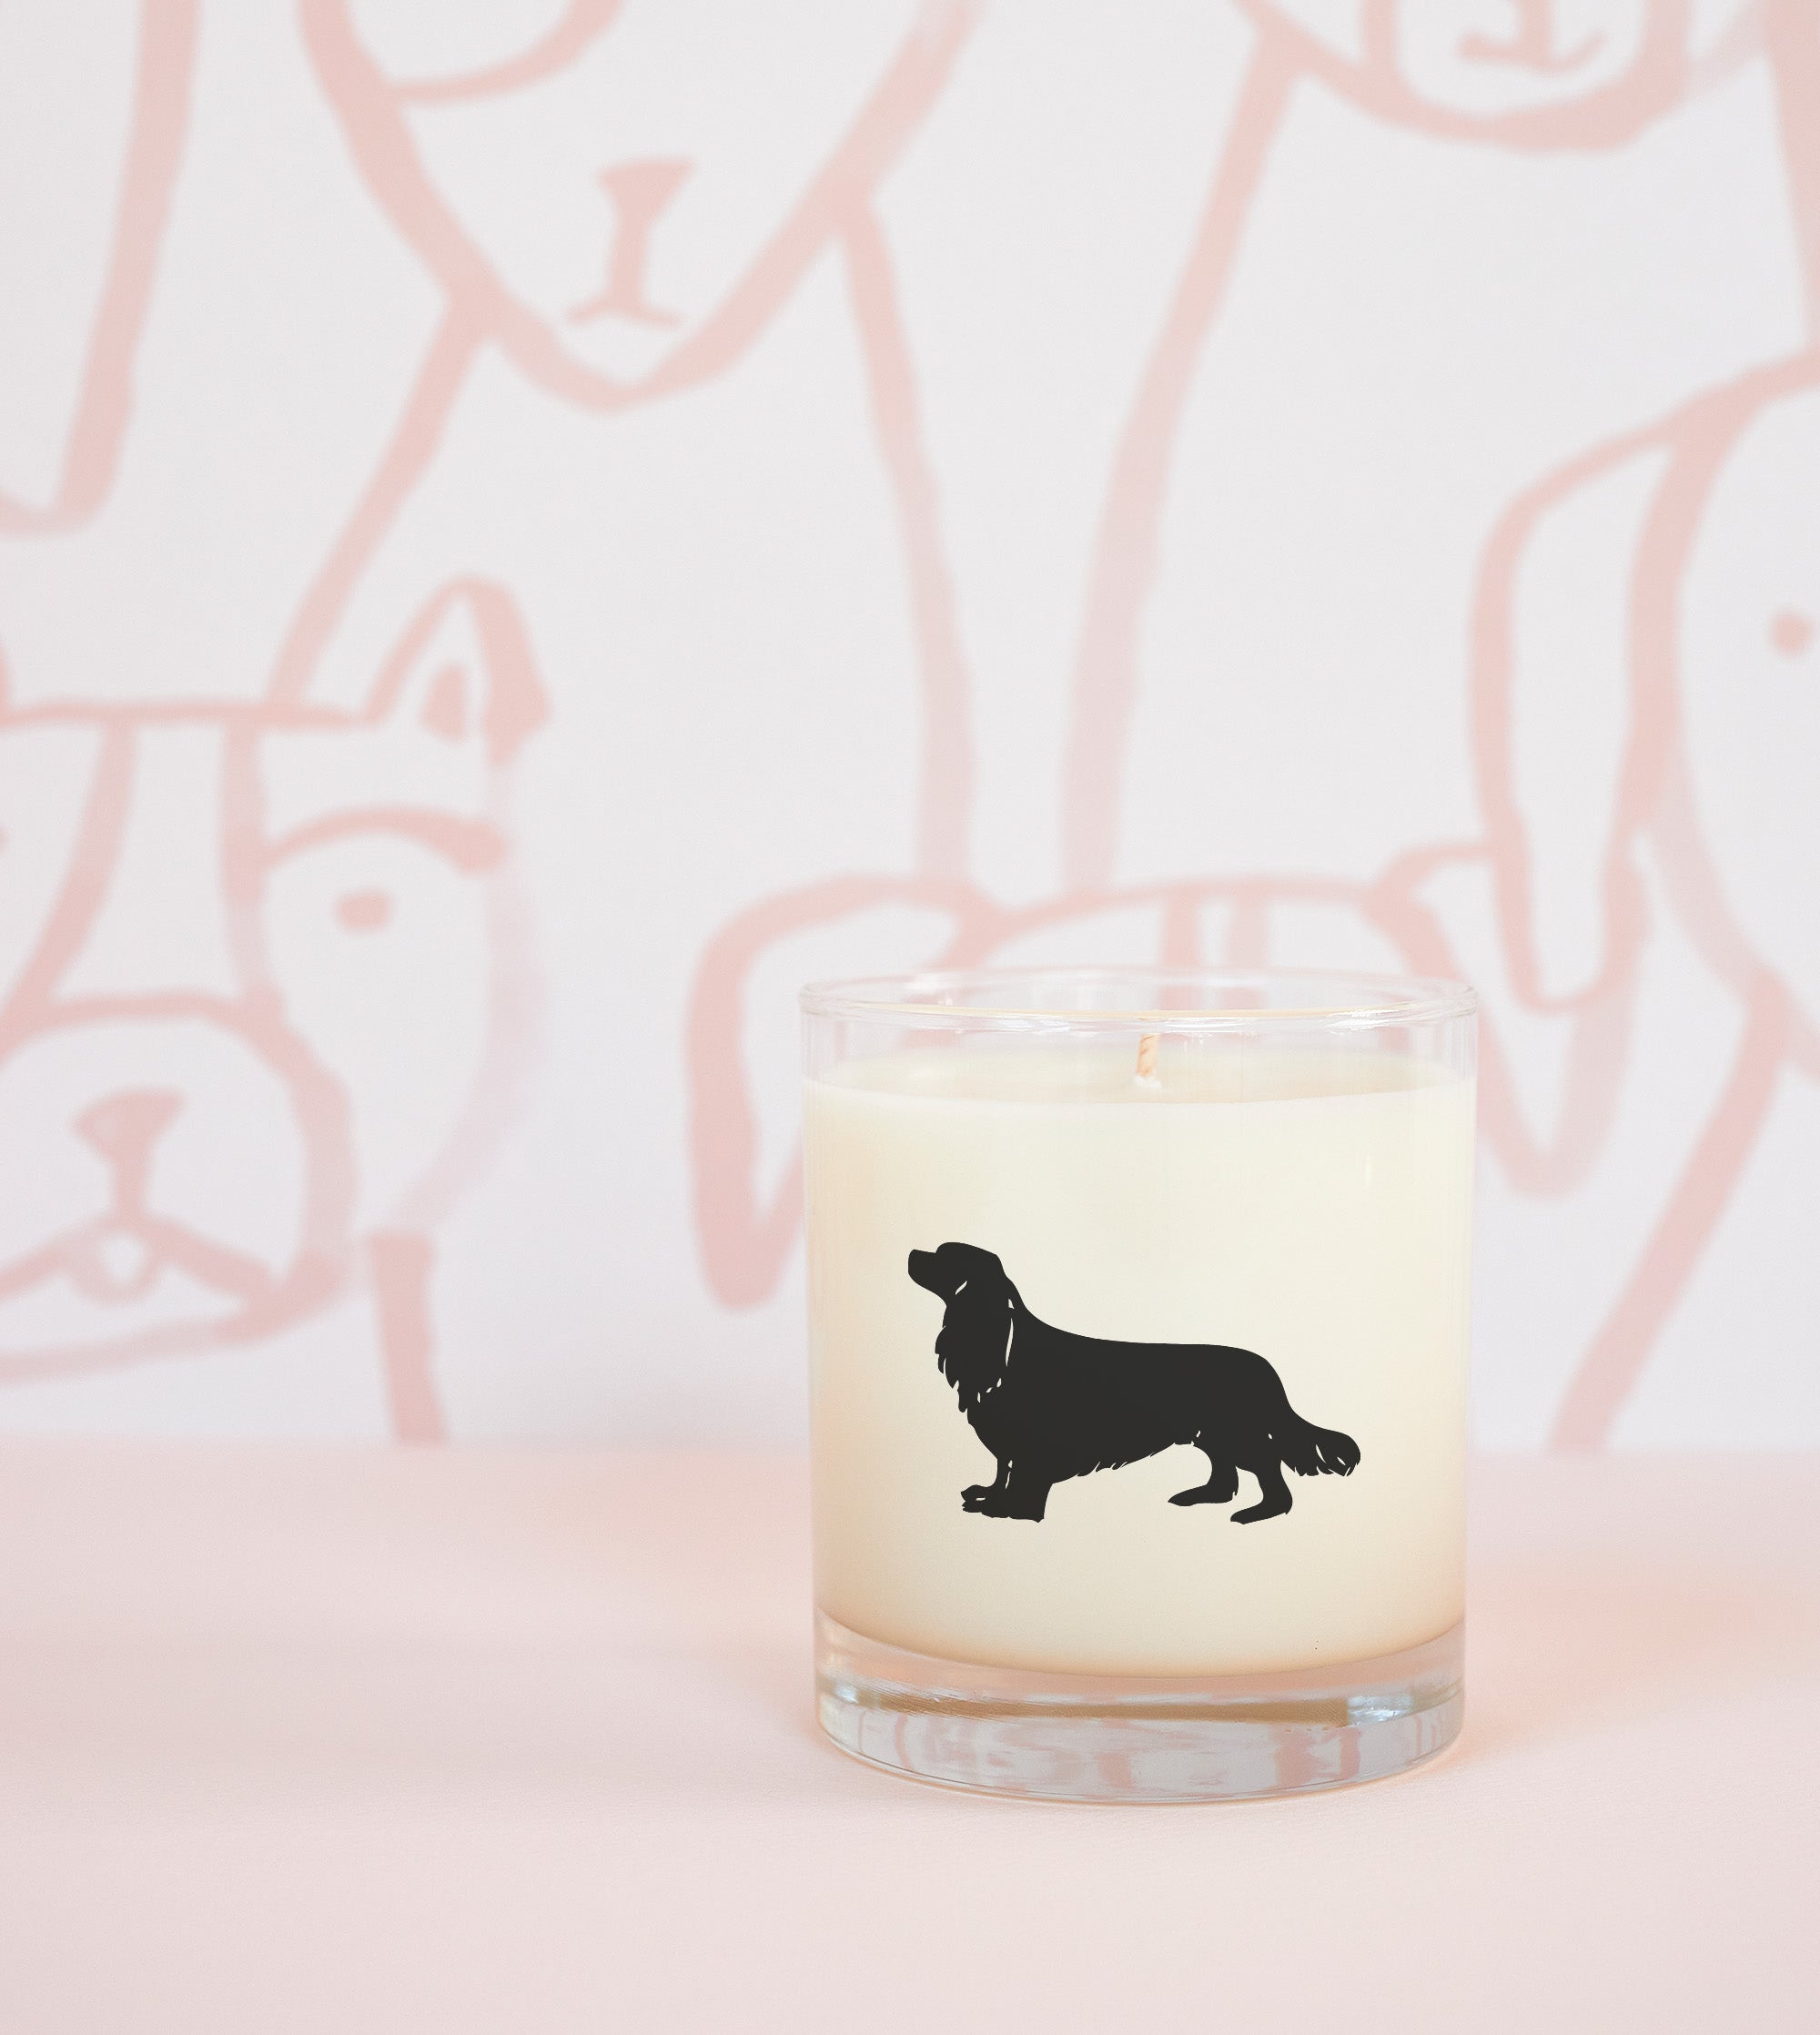 Cavalier King Charles Spaniel Dog Breed Soy Candle